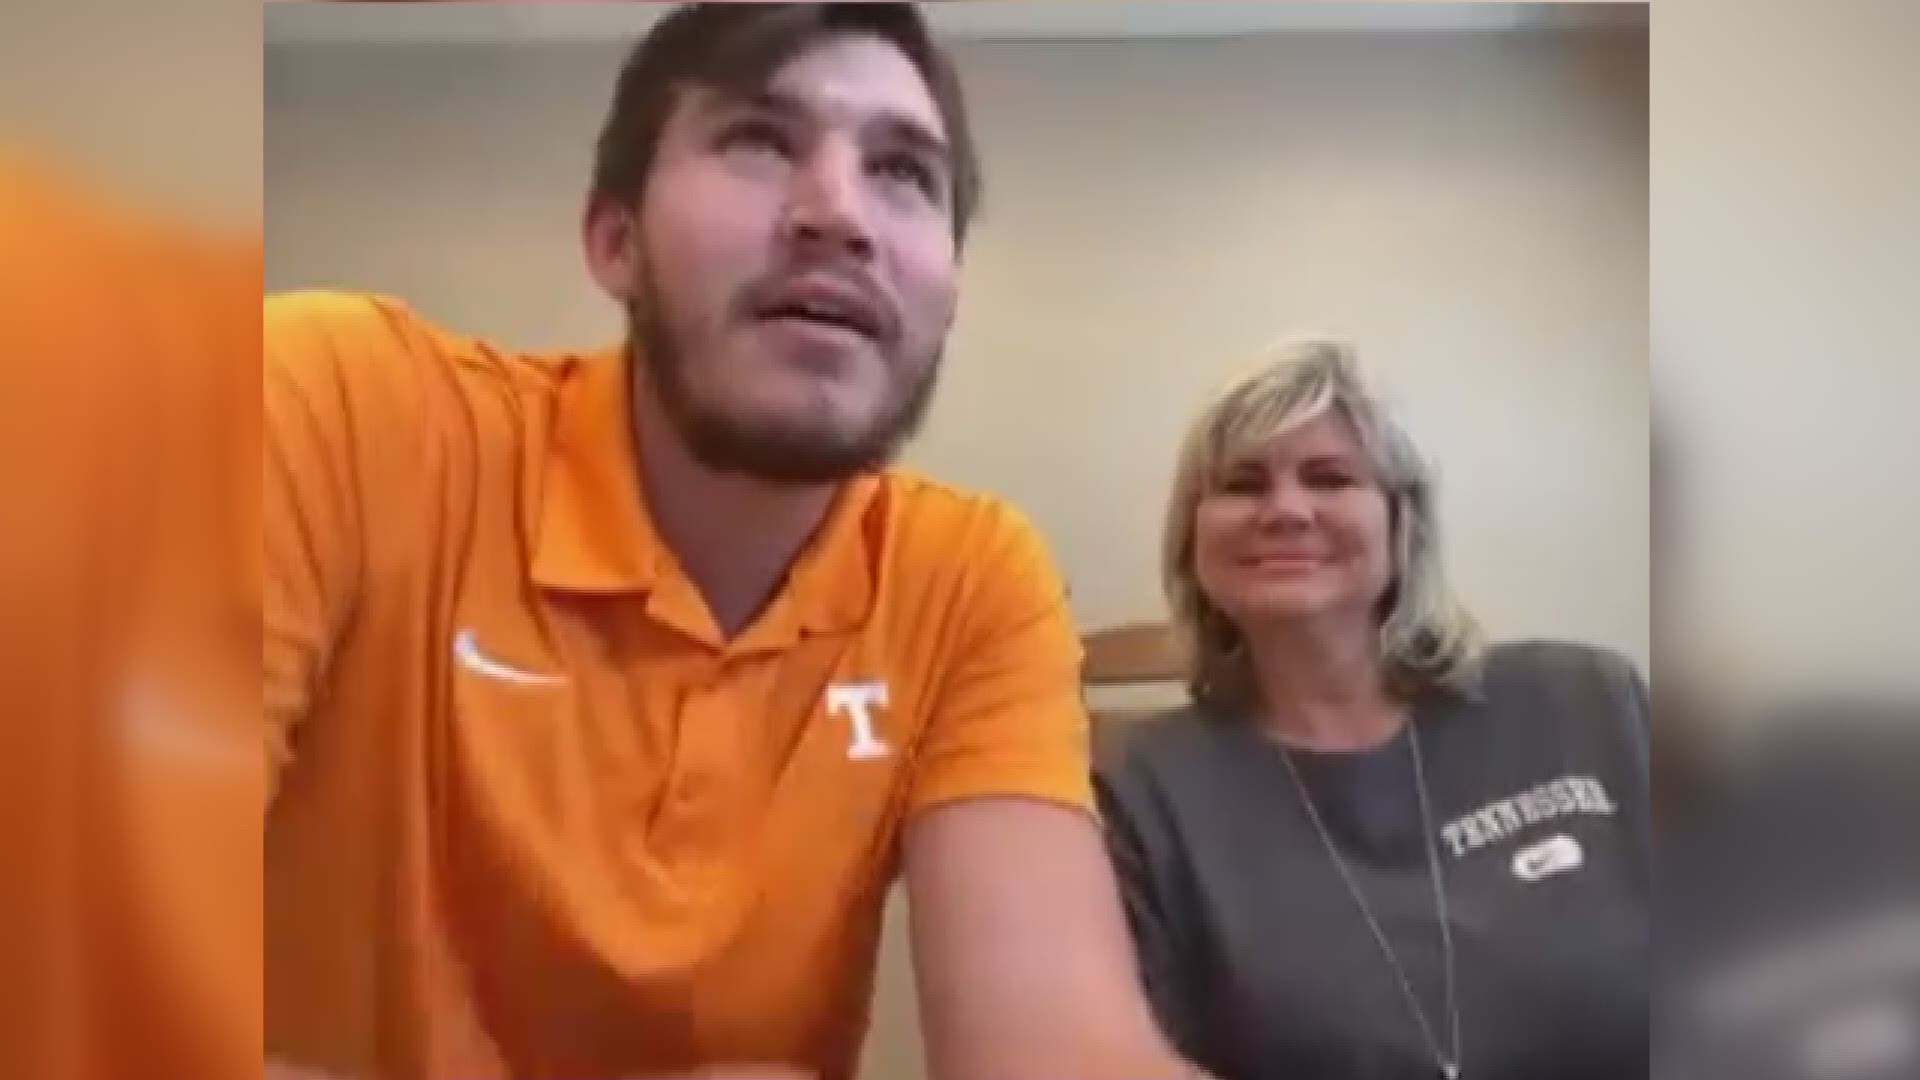 Tennessee basketball player John Fulkerson and his mother speak about their relationship as mother and son, as well as best friends.